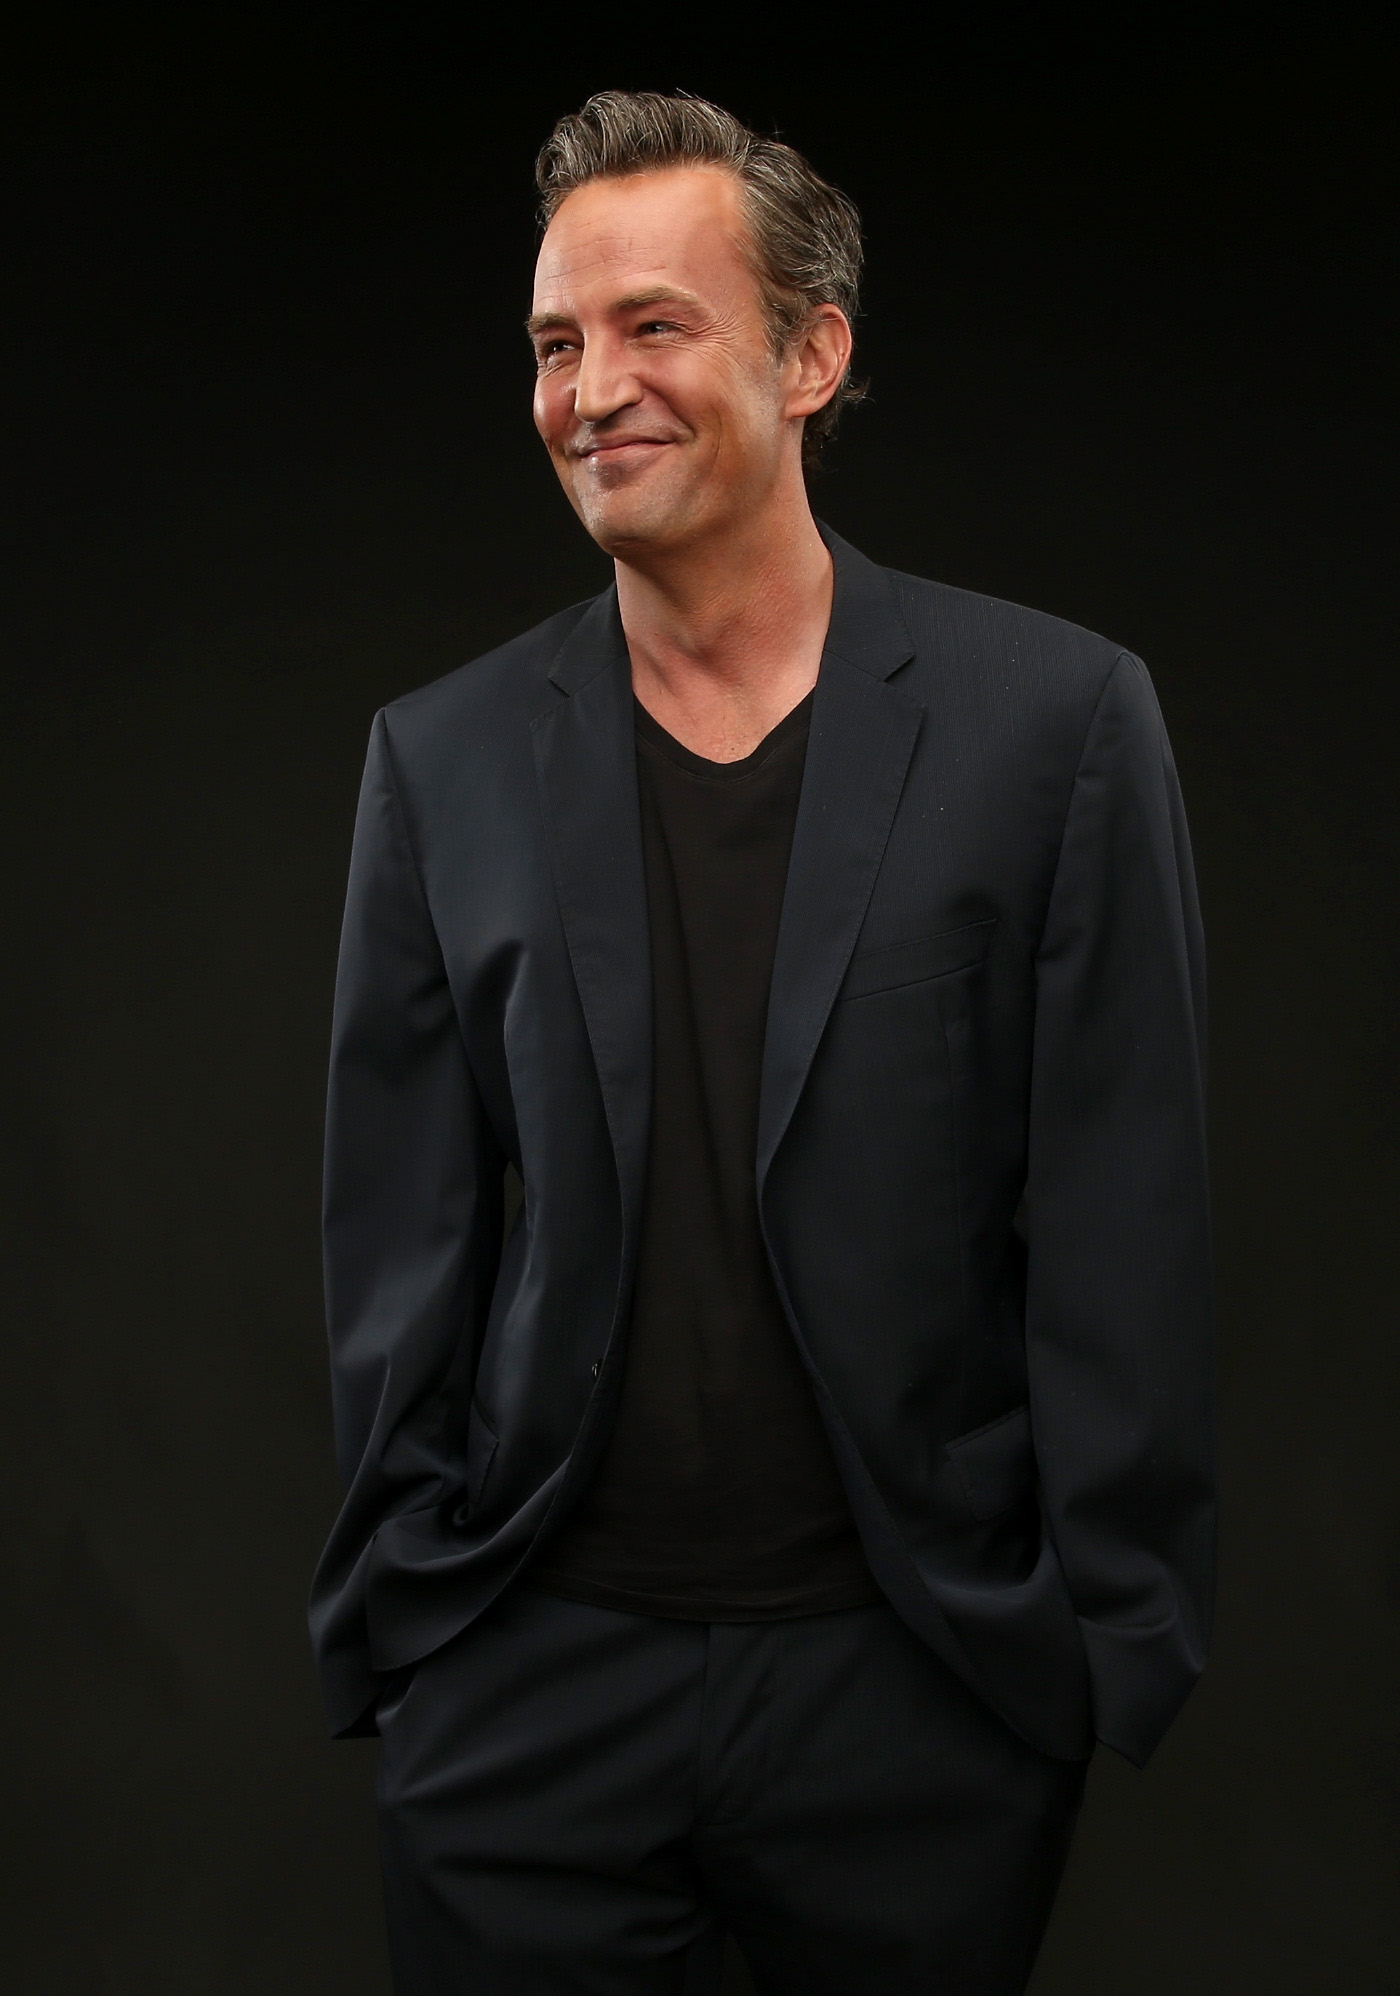 Matthew Perry poses for a portrait during CBS' Summer TCA tour in Beverly Hills, California on July 17, 2014. | Source: Getty Images